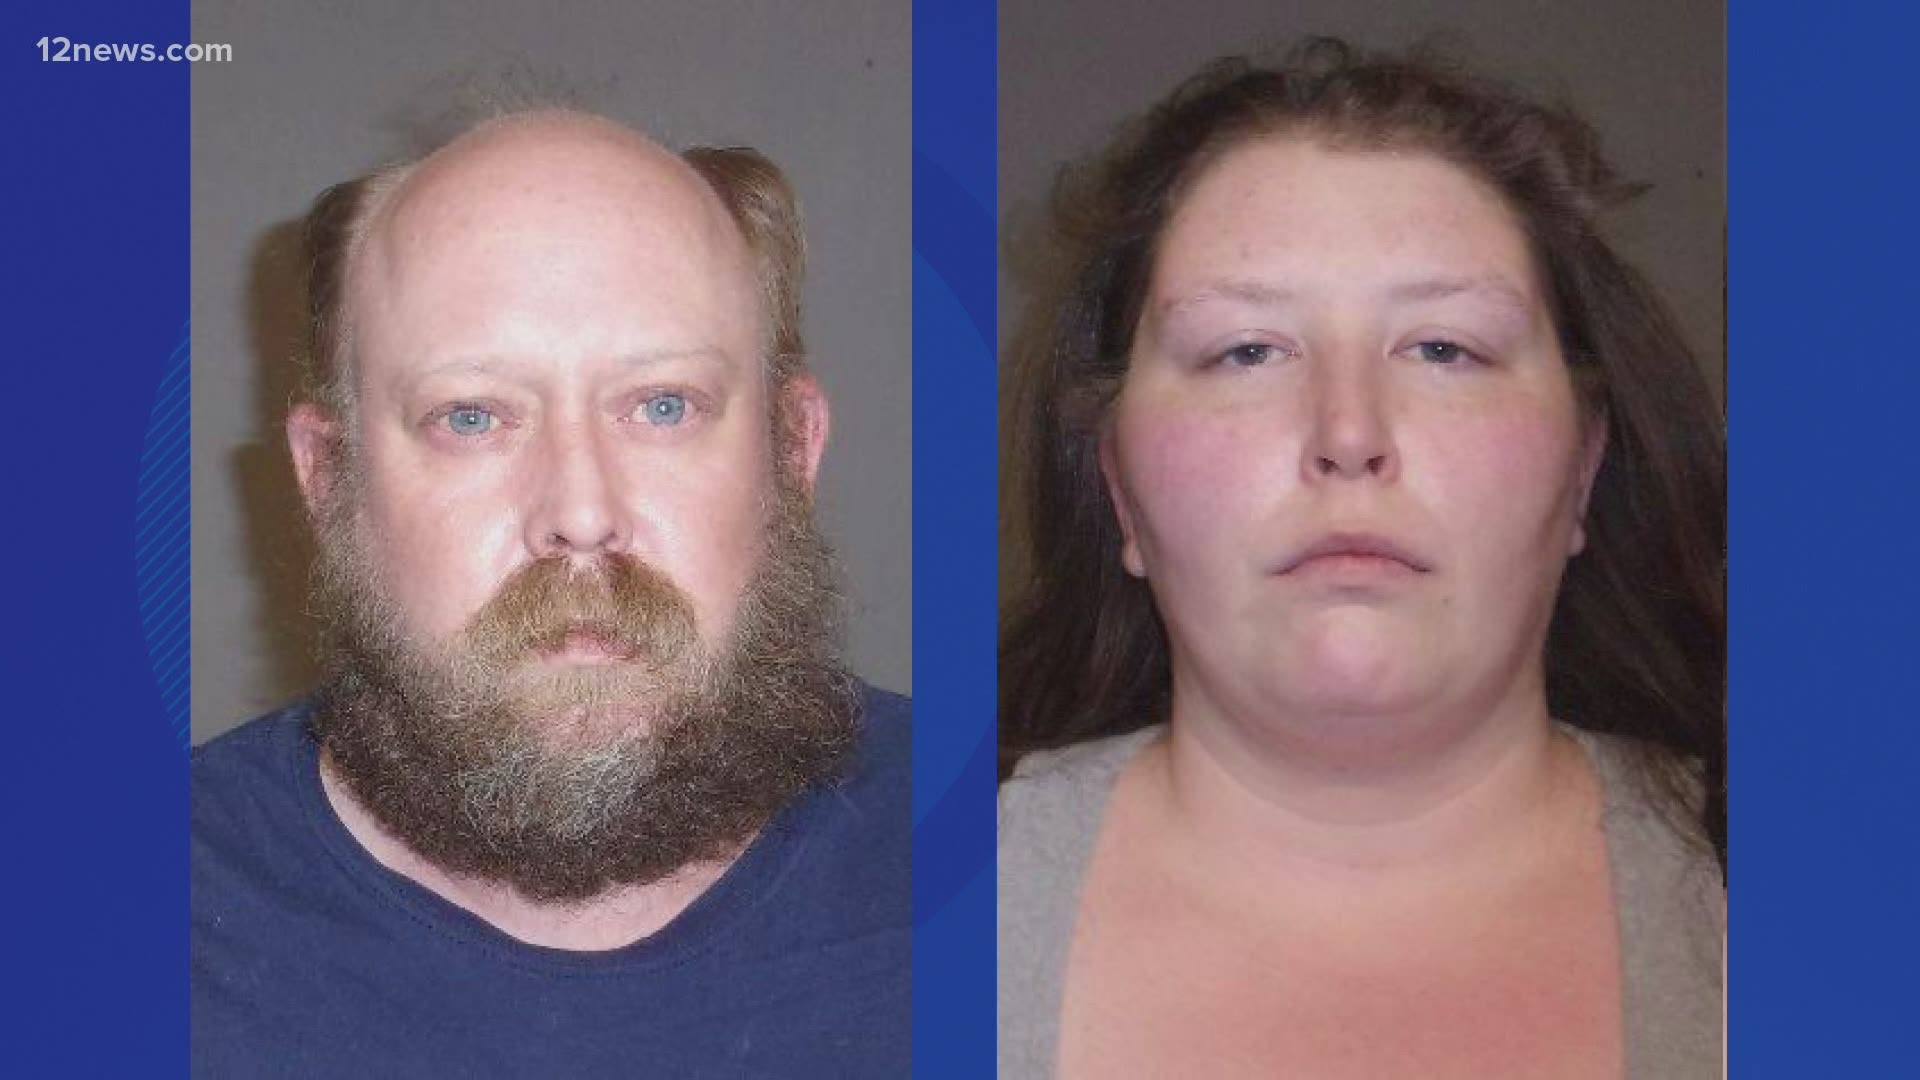 The girl’s parents, 39-year-old James Givens and 28-year-old Jamie McBride, were arrested by police and charged with 1st-degree murder.